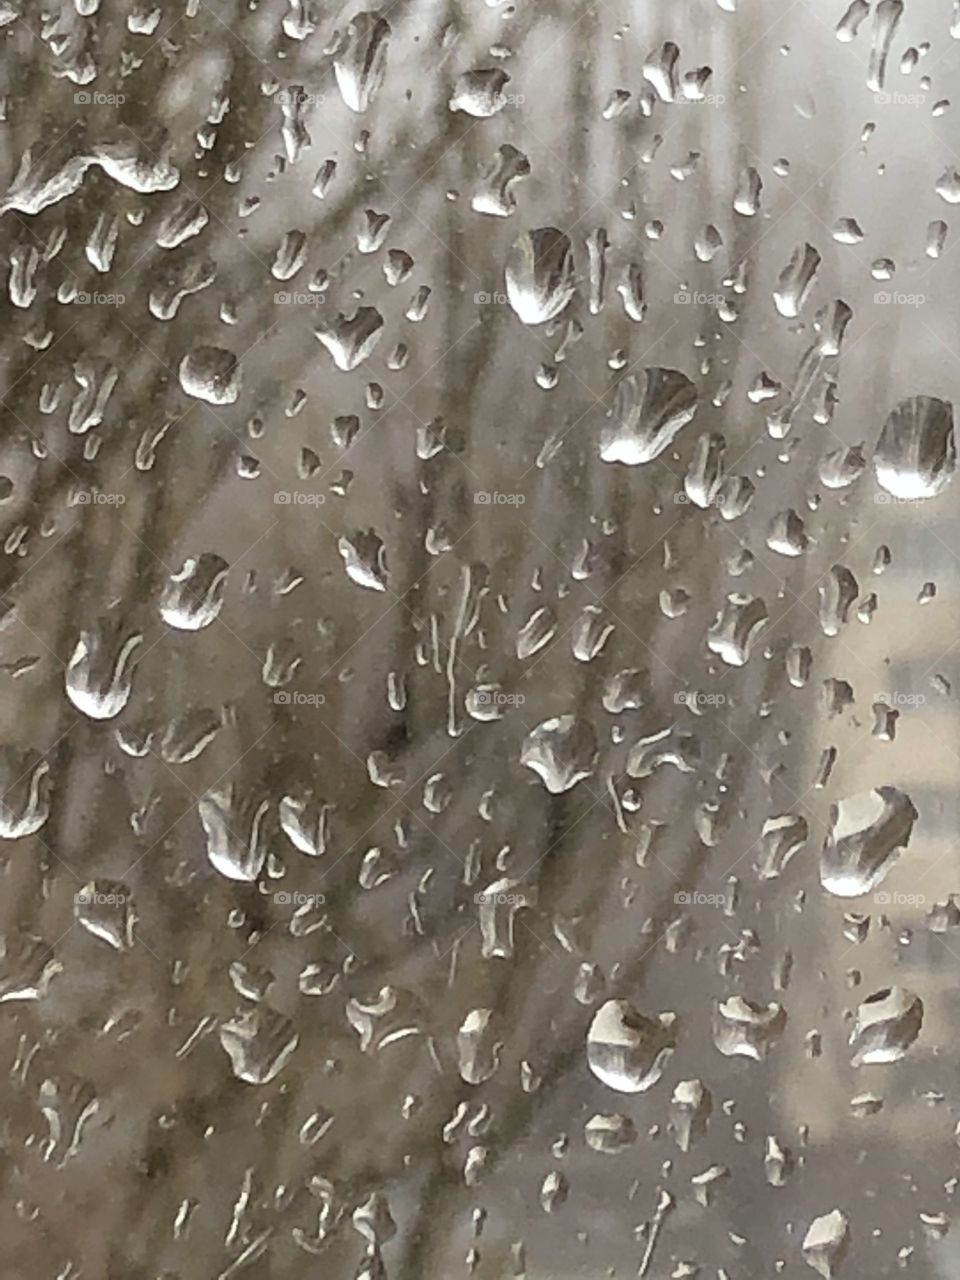 Drops on the glass 